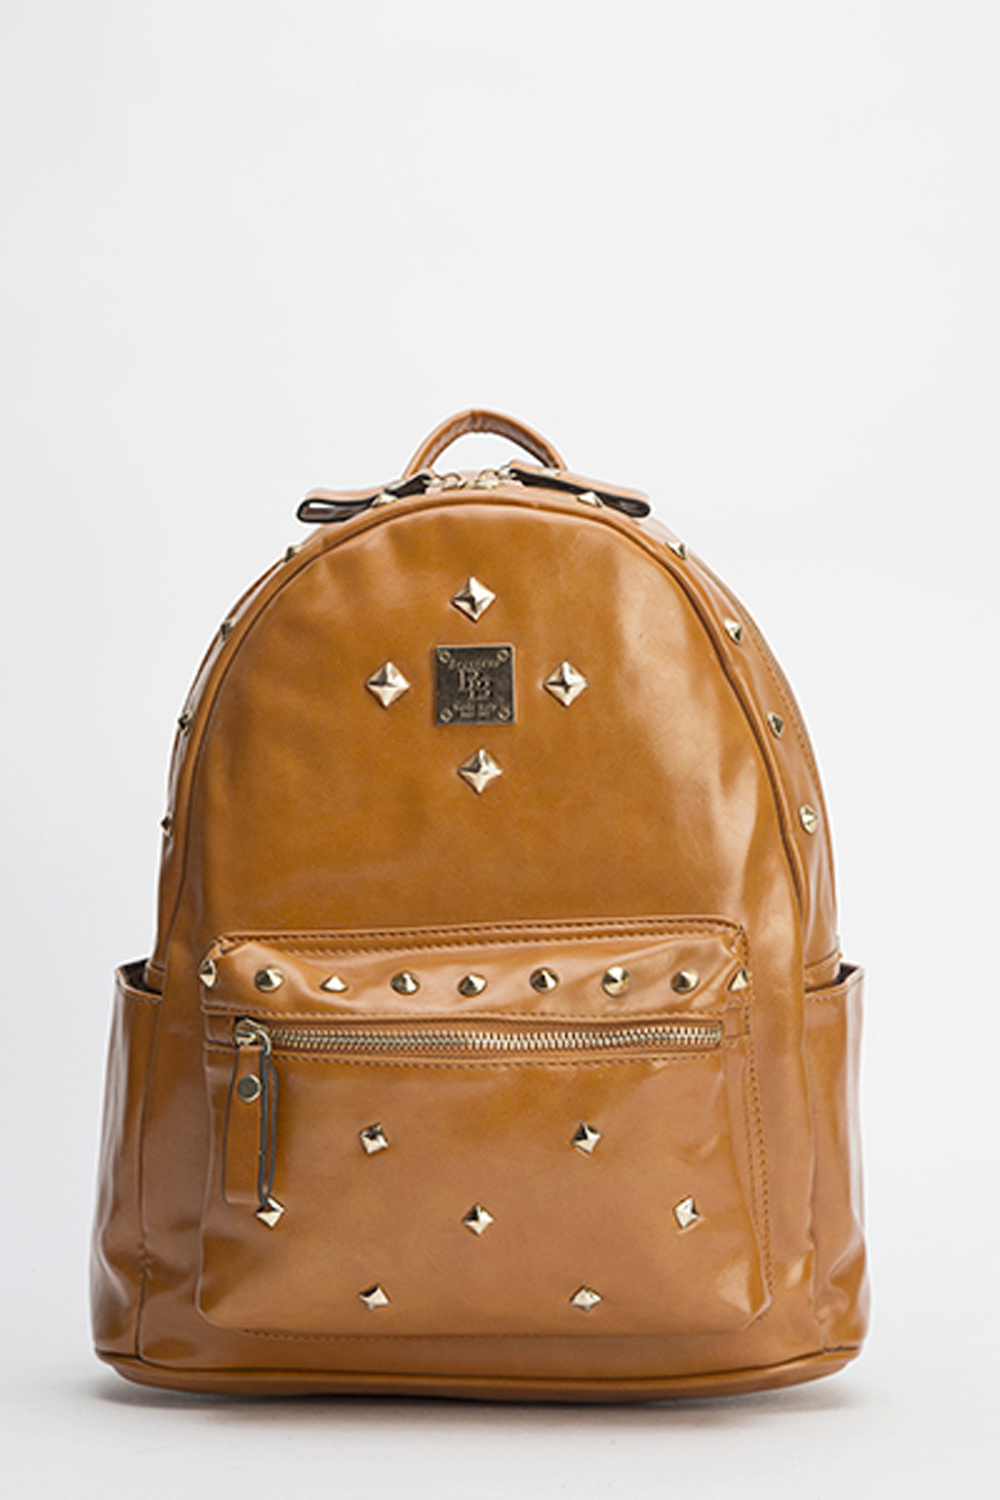 Studded Faux Leather Backpack - Just $7